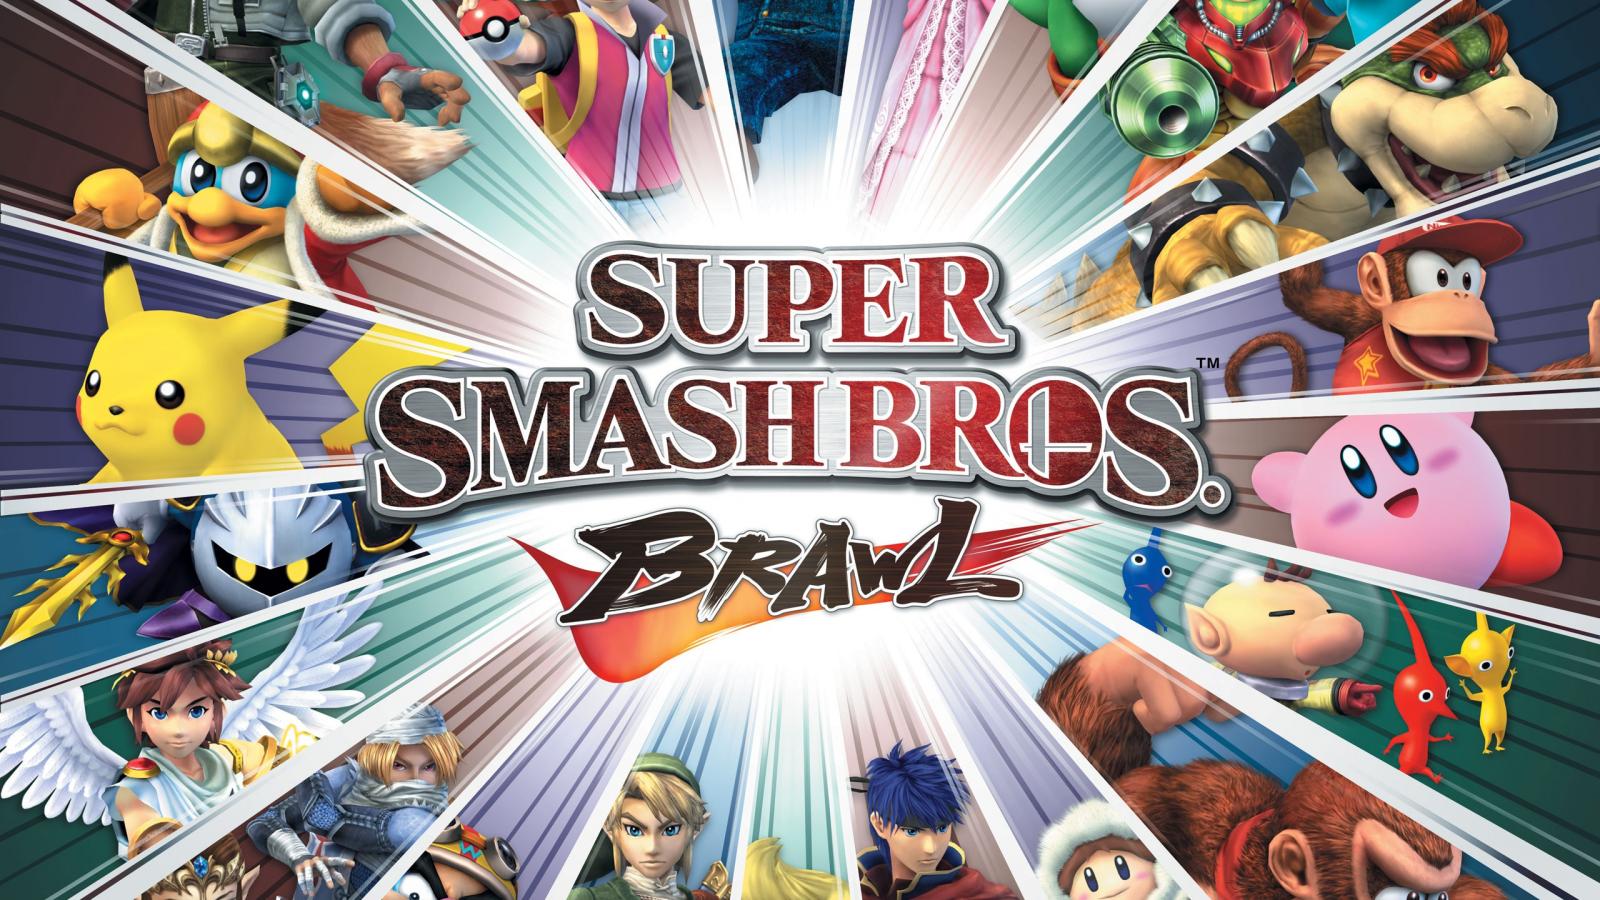 General 1600x900 Super Smash Brothers Wii Mario (Character) Pikachu Kirby Meta Knight Donkey Kong video games crossover Video Game Crossover air exists in the image Nintendo video game characters